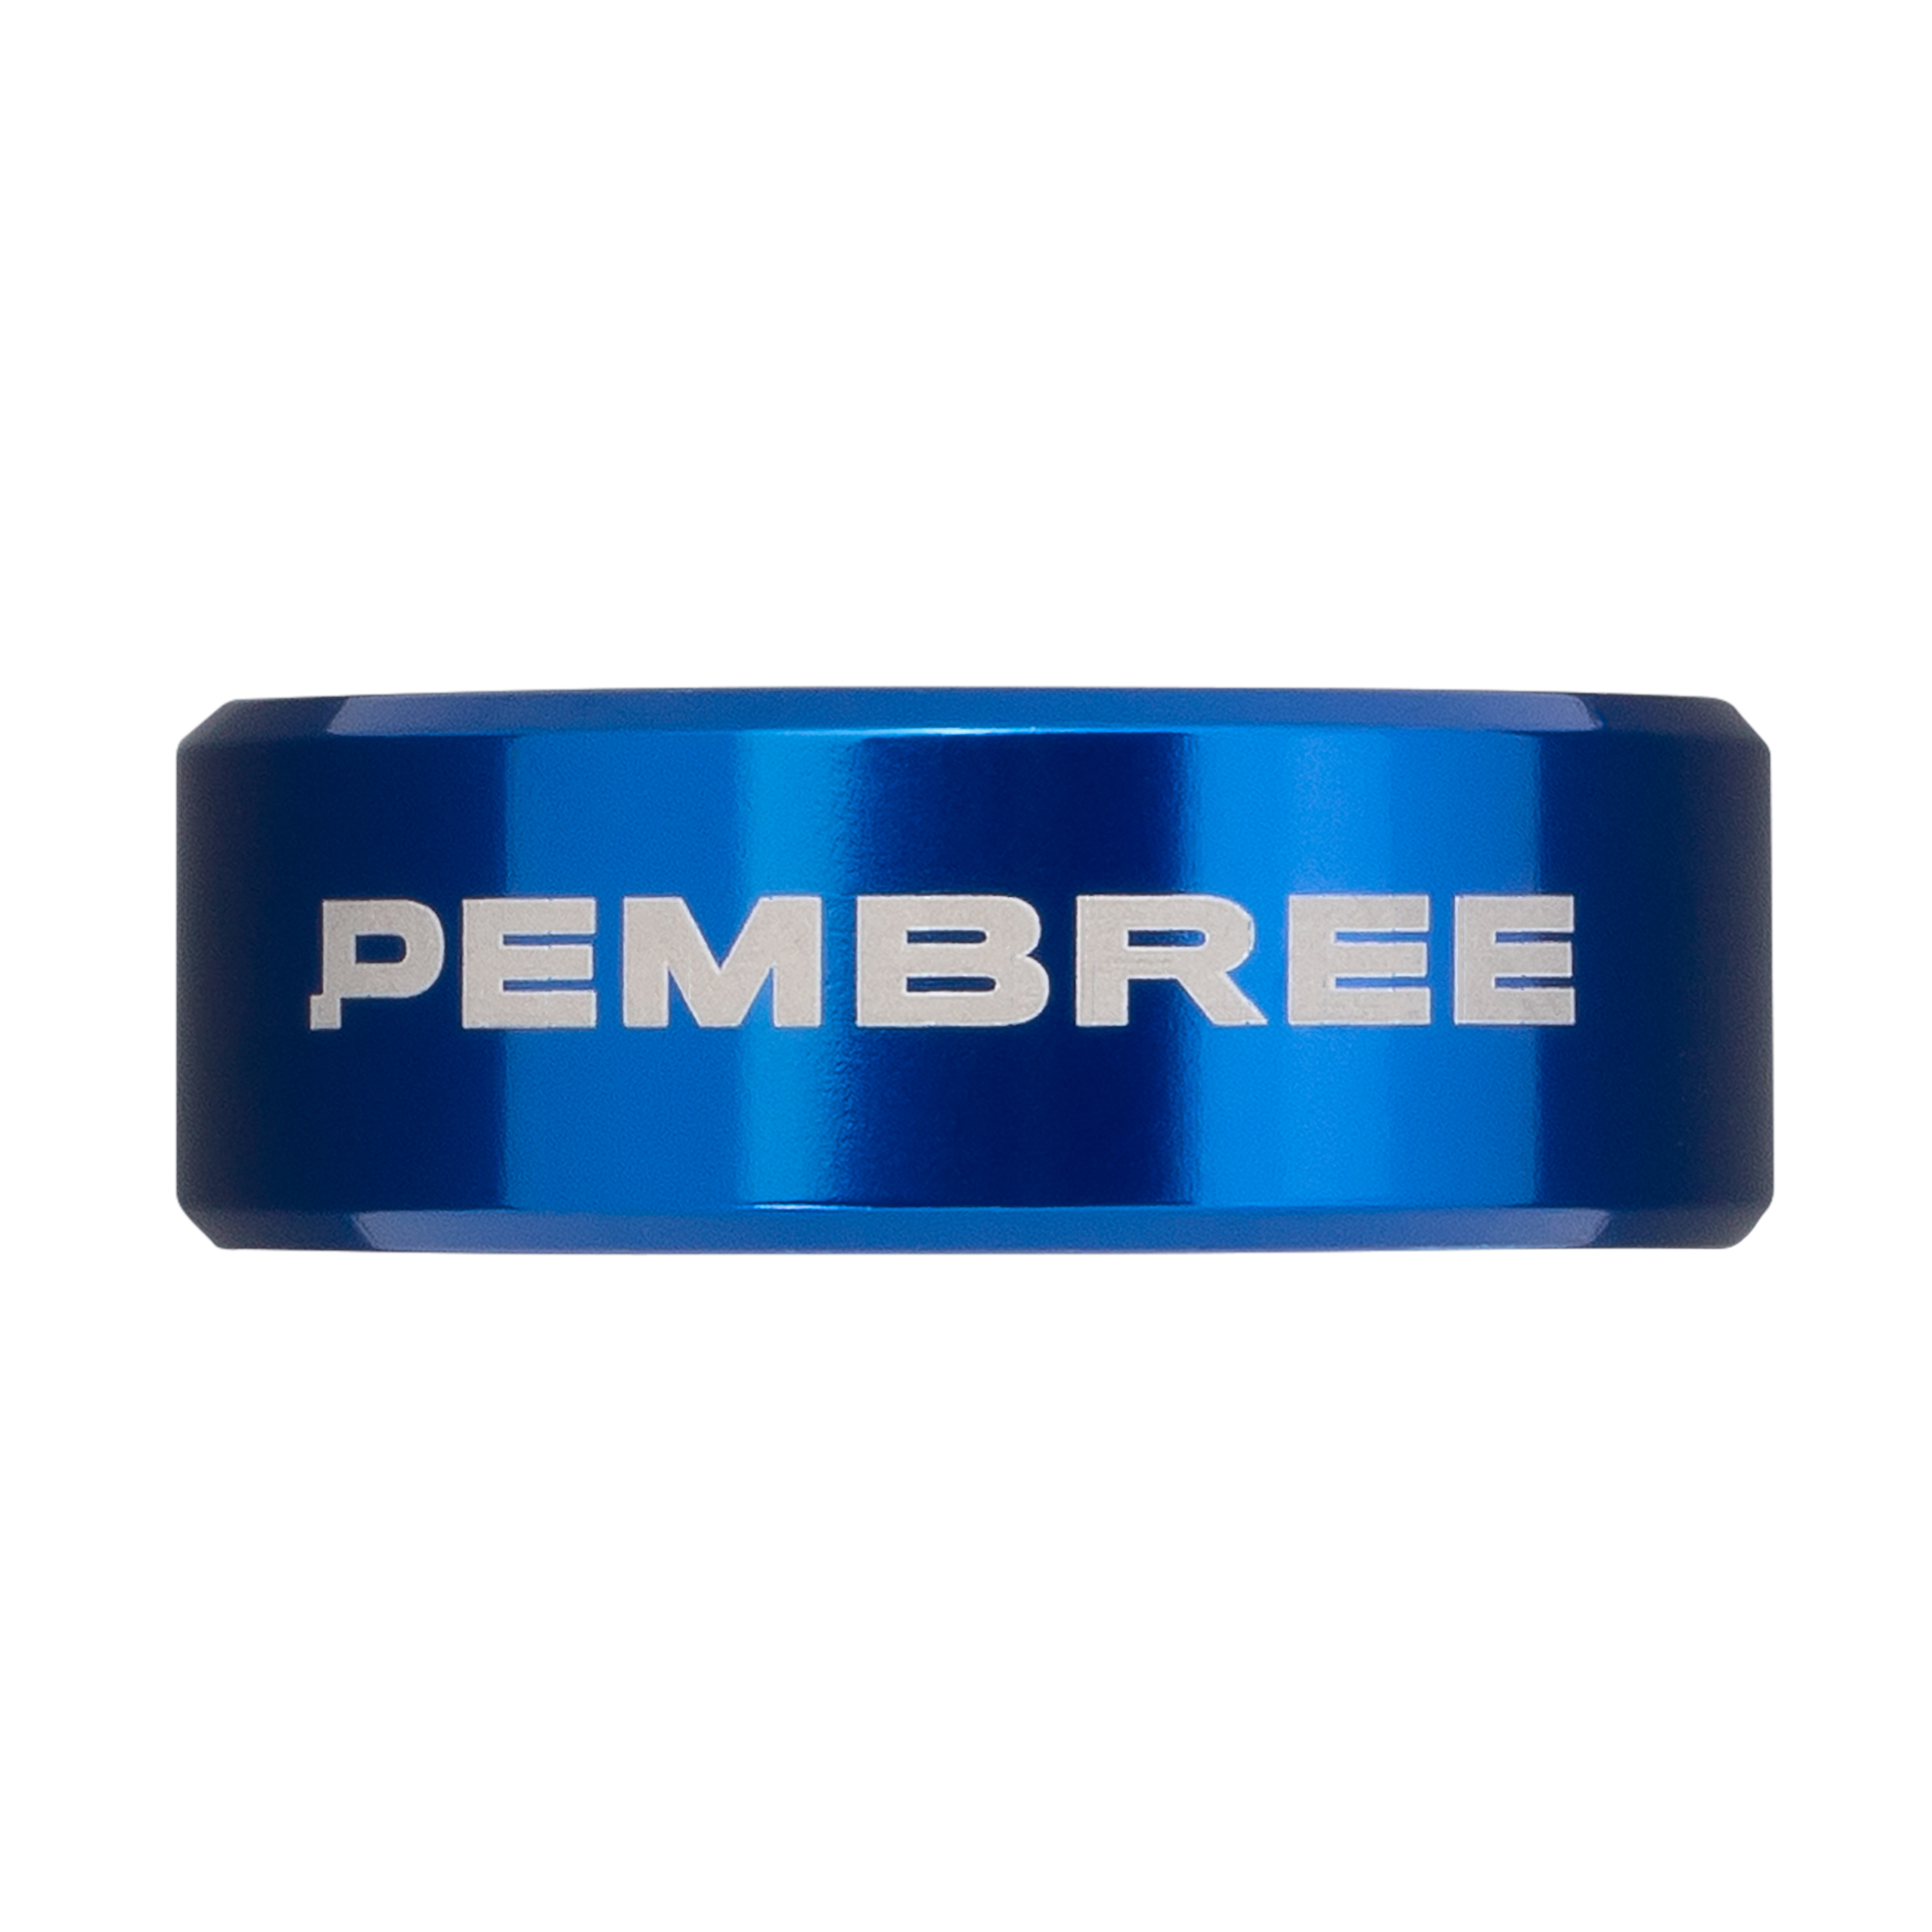 PEMBREE-DBN-Seat-Post-Clamp-Blue-Front.jpg